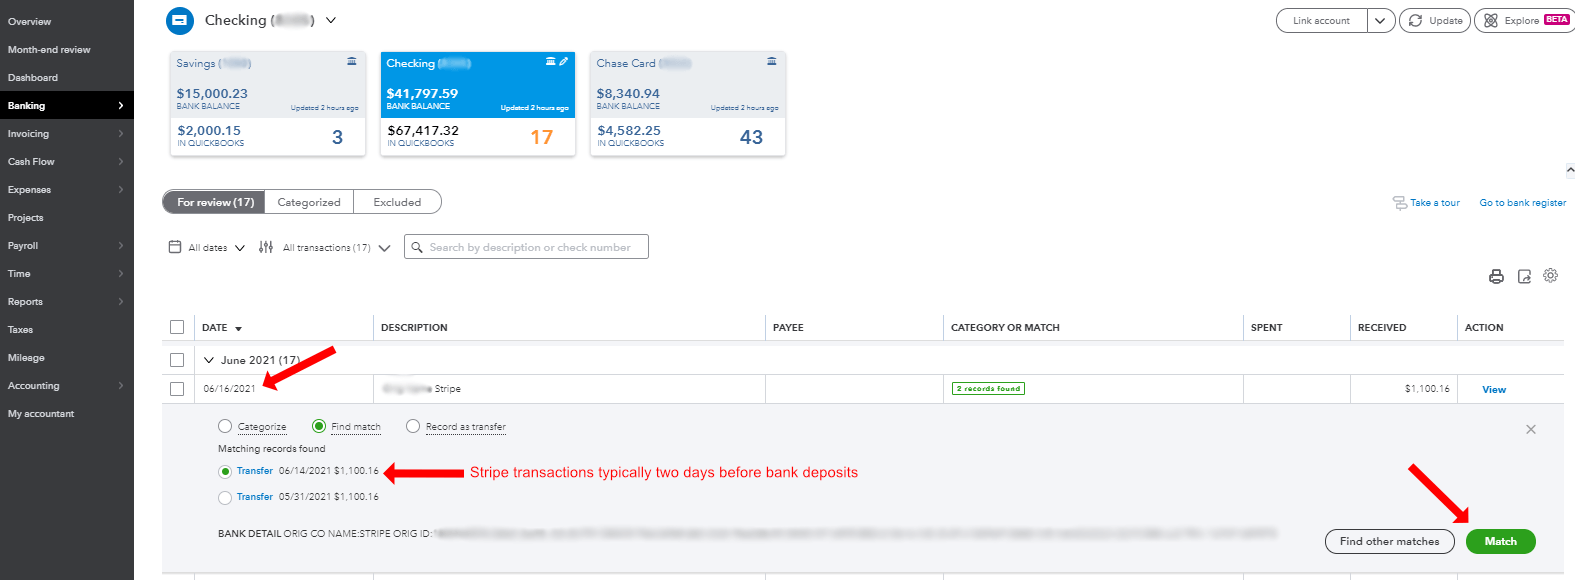 Once the Payout transaction is synced in Synder, you will be able to see and Match these transactions in the corresponding bank account. However, if you have more than one transfer with same amount with two different dates you need to select find match and select relevant transfer amount based on date of transfer. Typically Stripe transfer deposited in bank account after two days from the transfer date. 